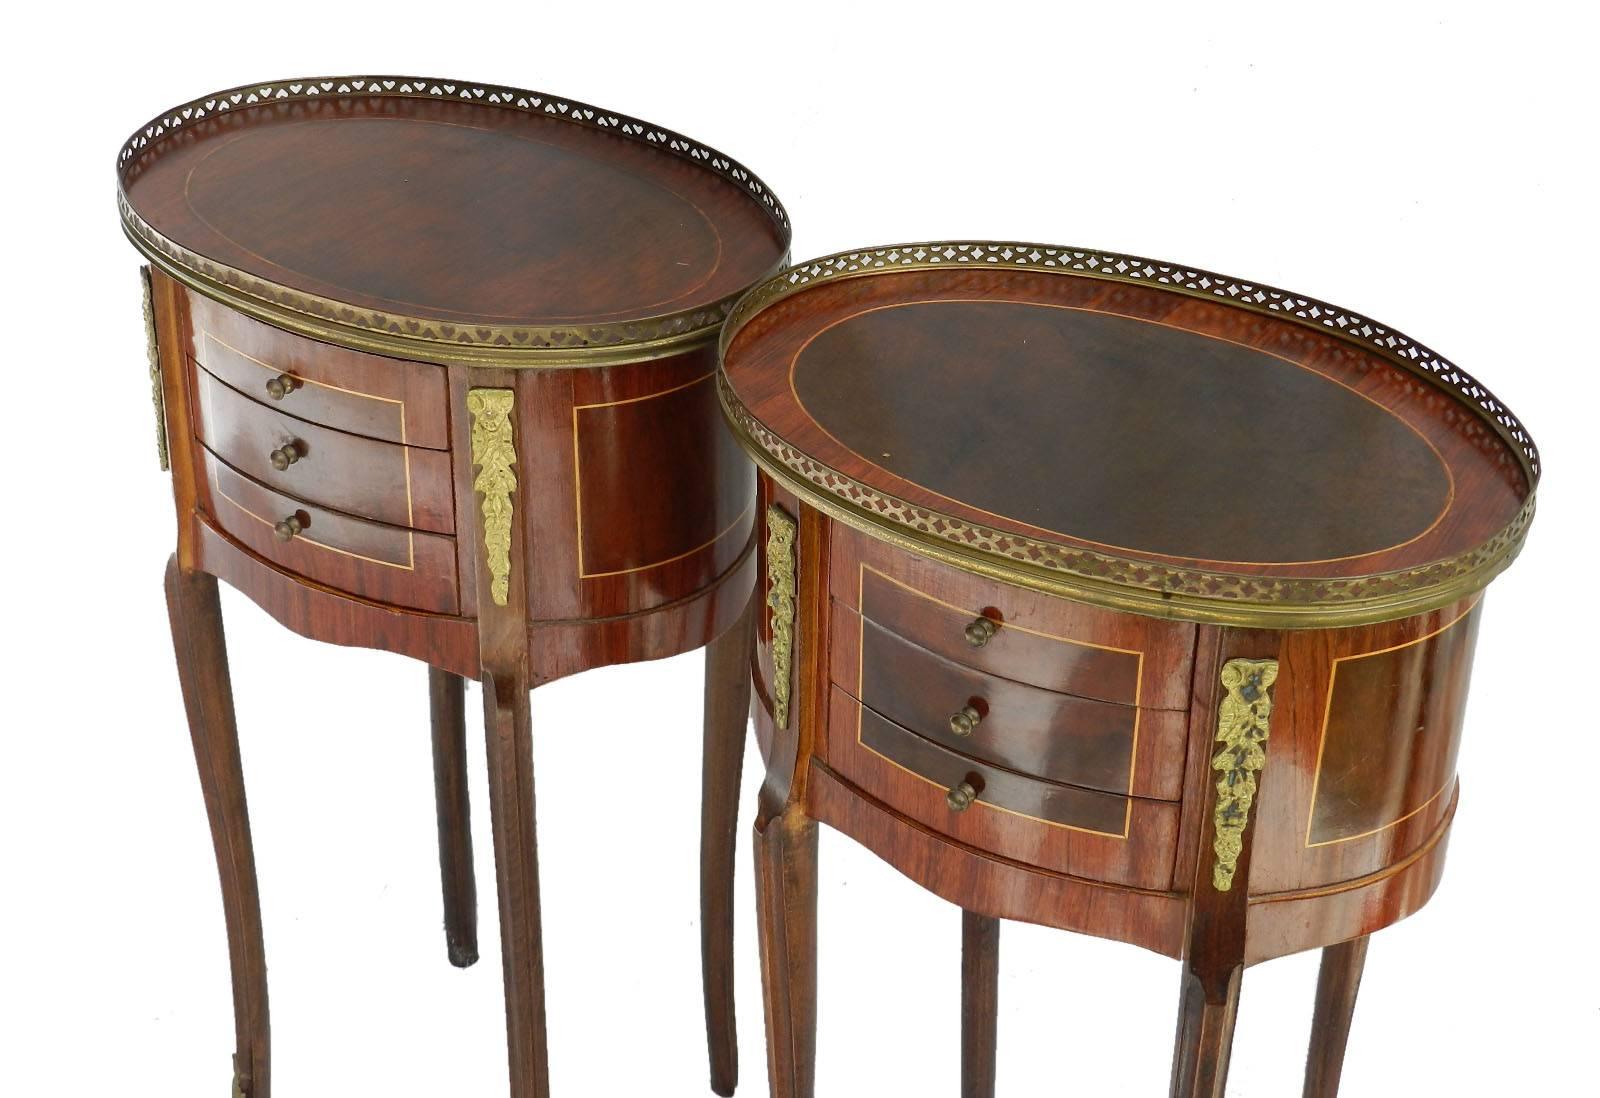 Pair of French nightstands bedside tables Louis revival, circa 1920s
Side cabinets
Unusual oval tops with brass gallery
Each with three small drawers
Ormolu and string inlay
Good vintage condition with minor signs of age and use nothing